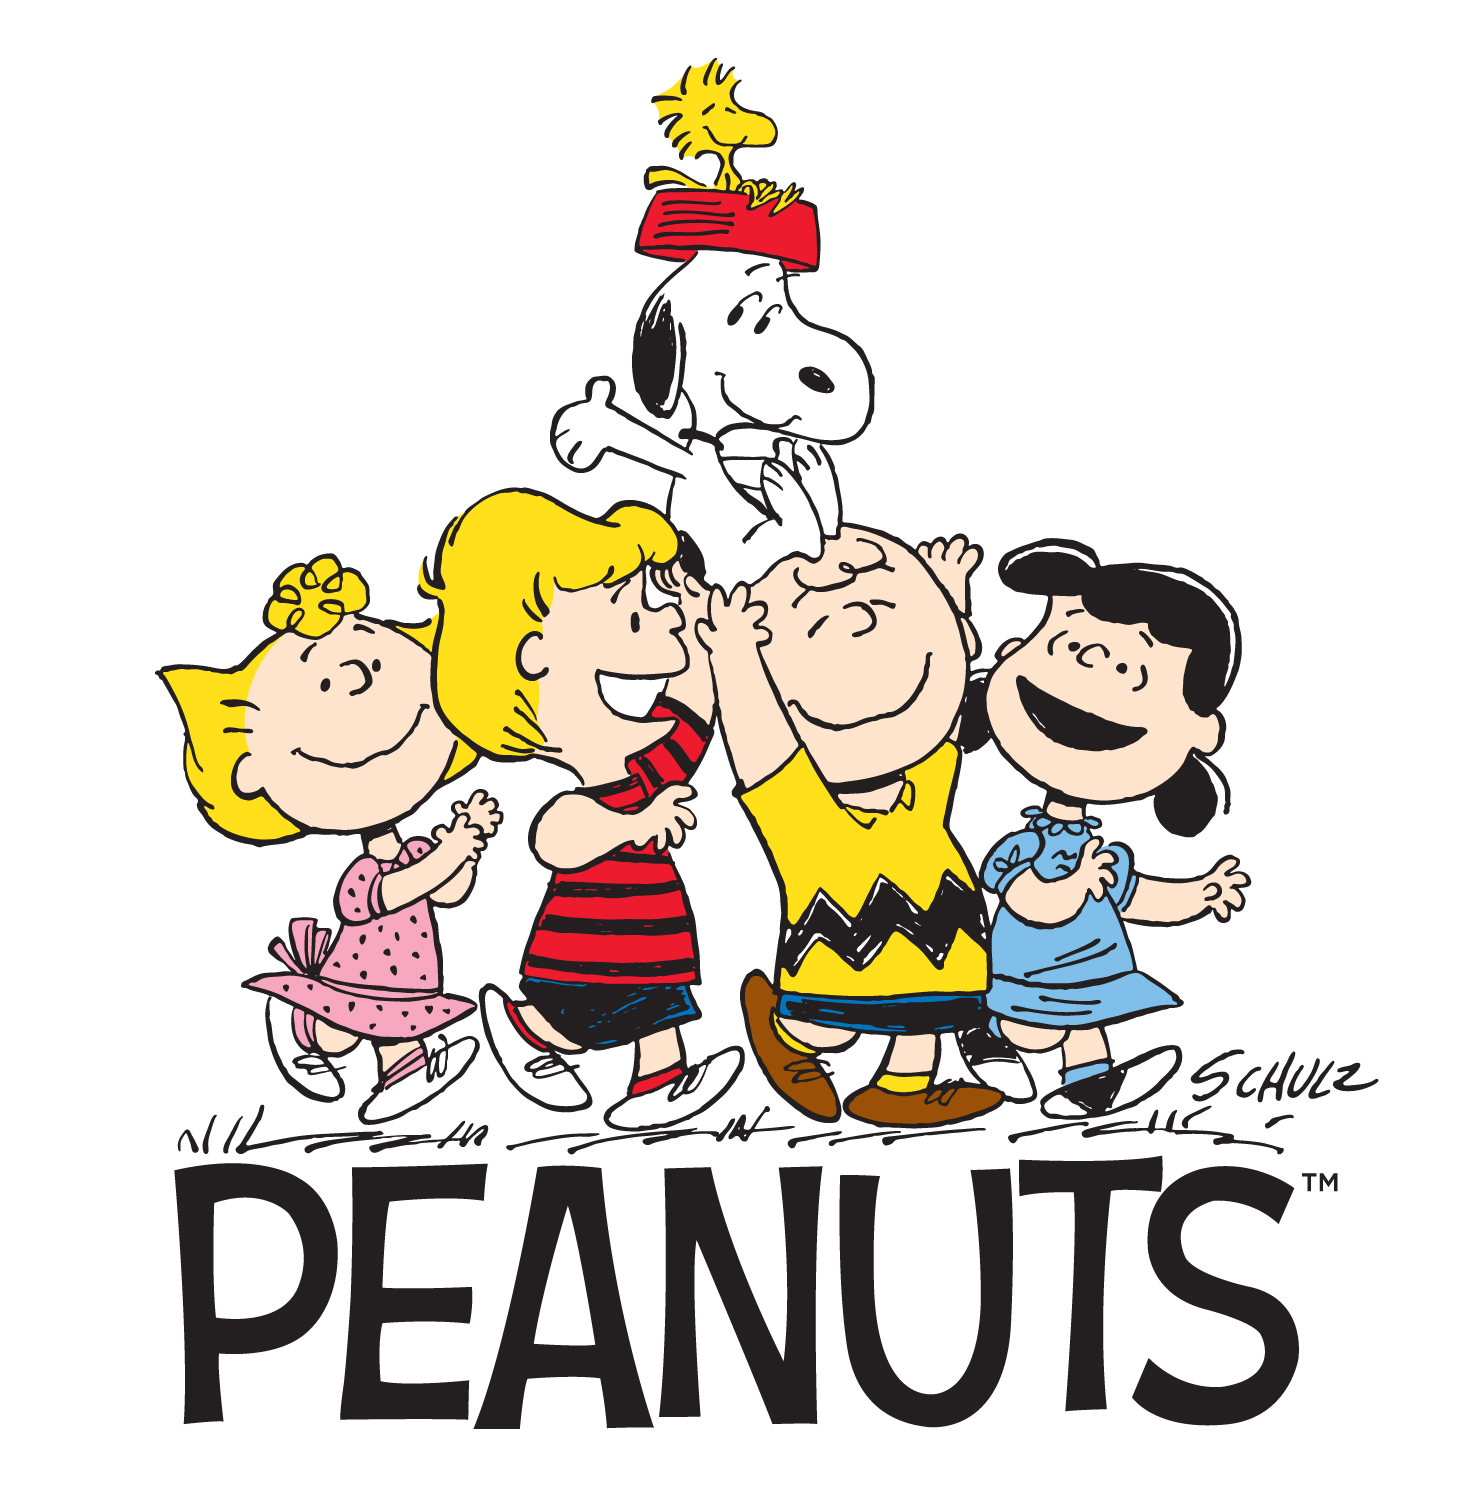 "Peanuts" Movie to Hit Theaters During the 65th Anniversary of the Peanut ic Strip and the 50th Anniversary of “A Charlie Brown Christmas” TV Special